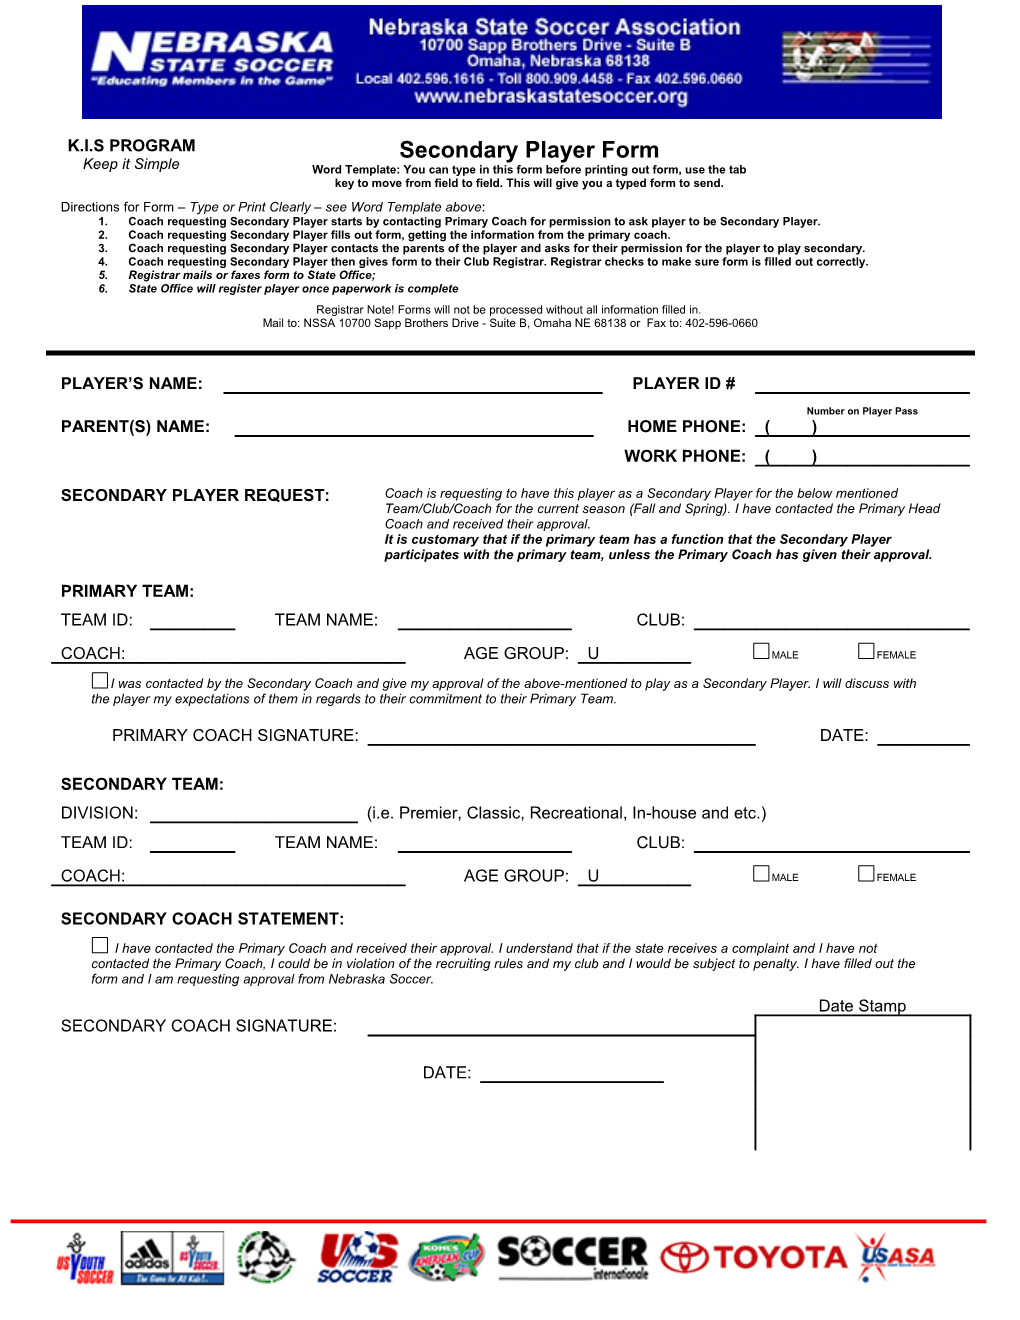 Secondary Player Form